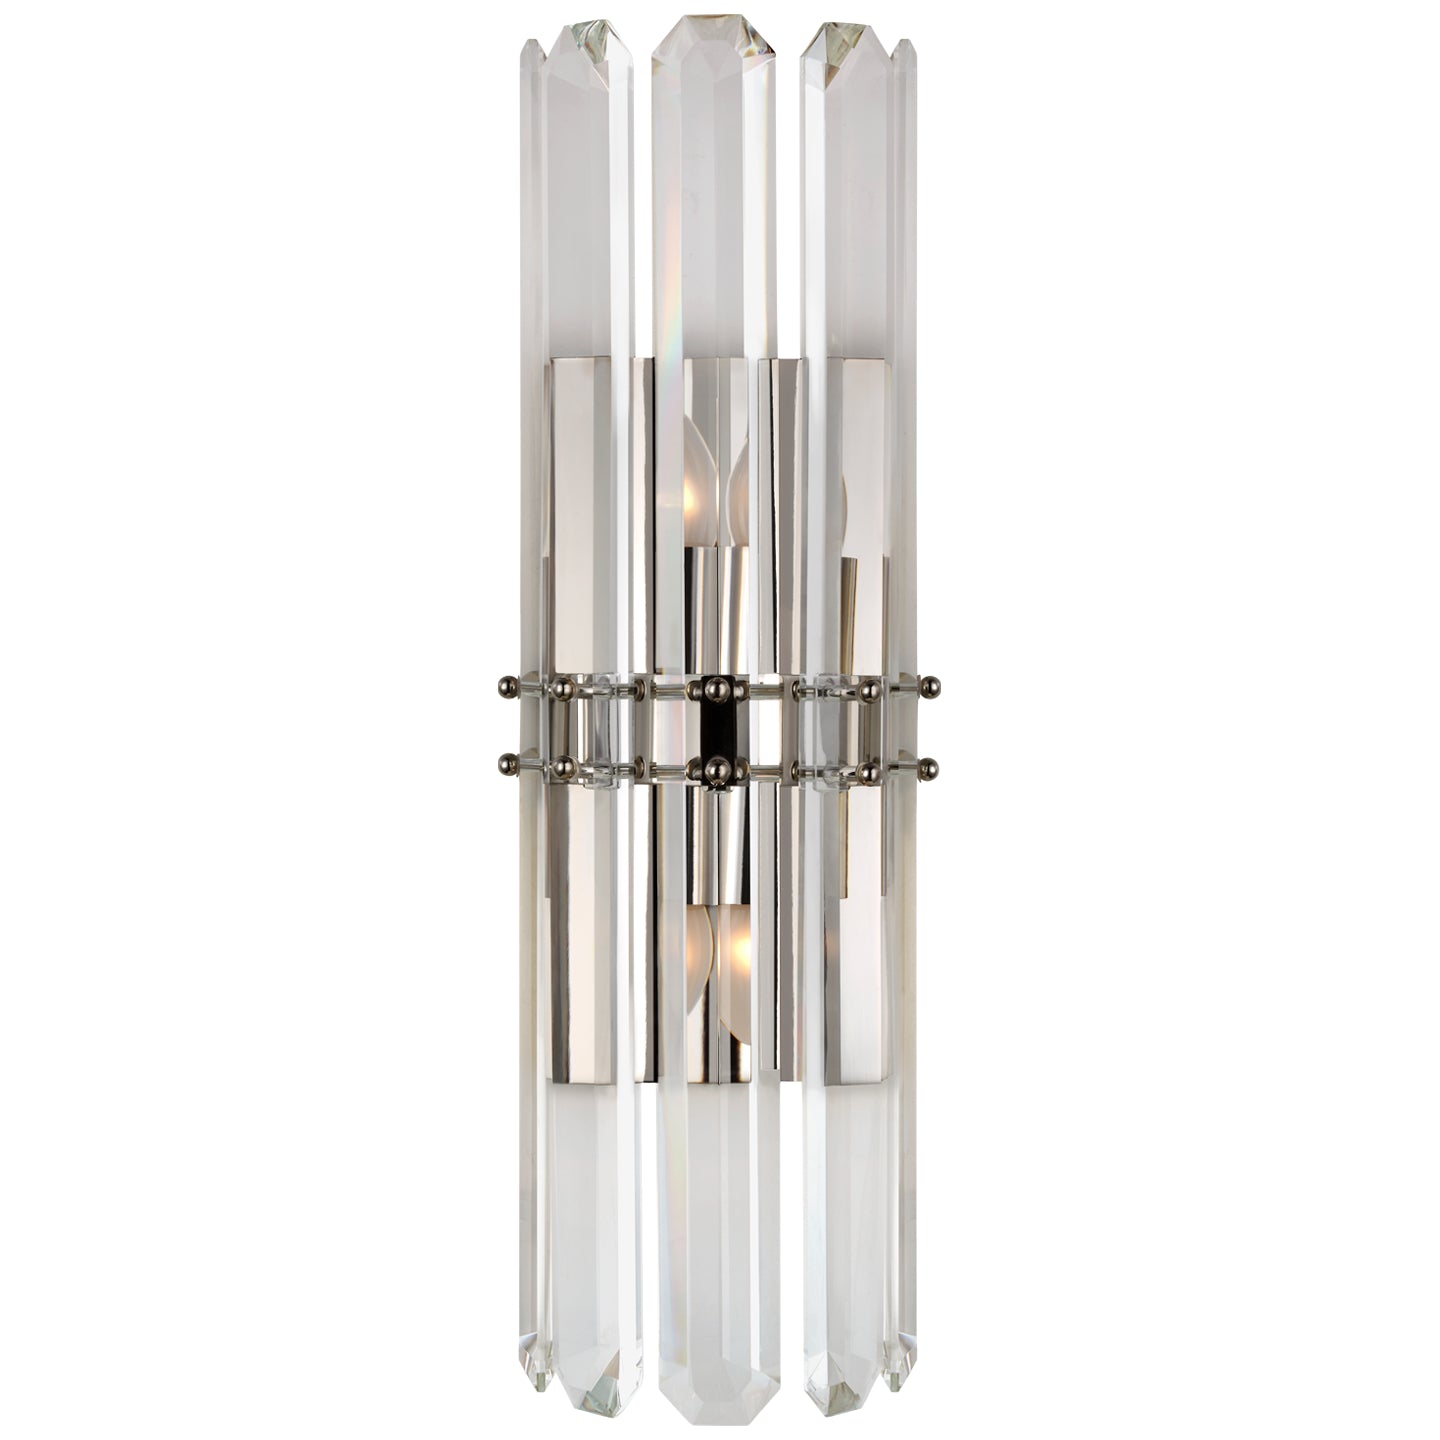 Load image into Gallery viewer, Visual Comfort Signature - ARN 2125PN - Two Light Wall Sconce - Bonnington - Polished Nickel
